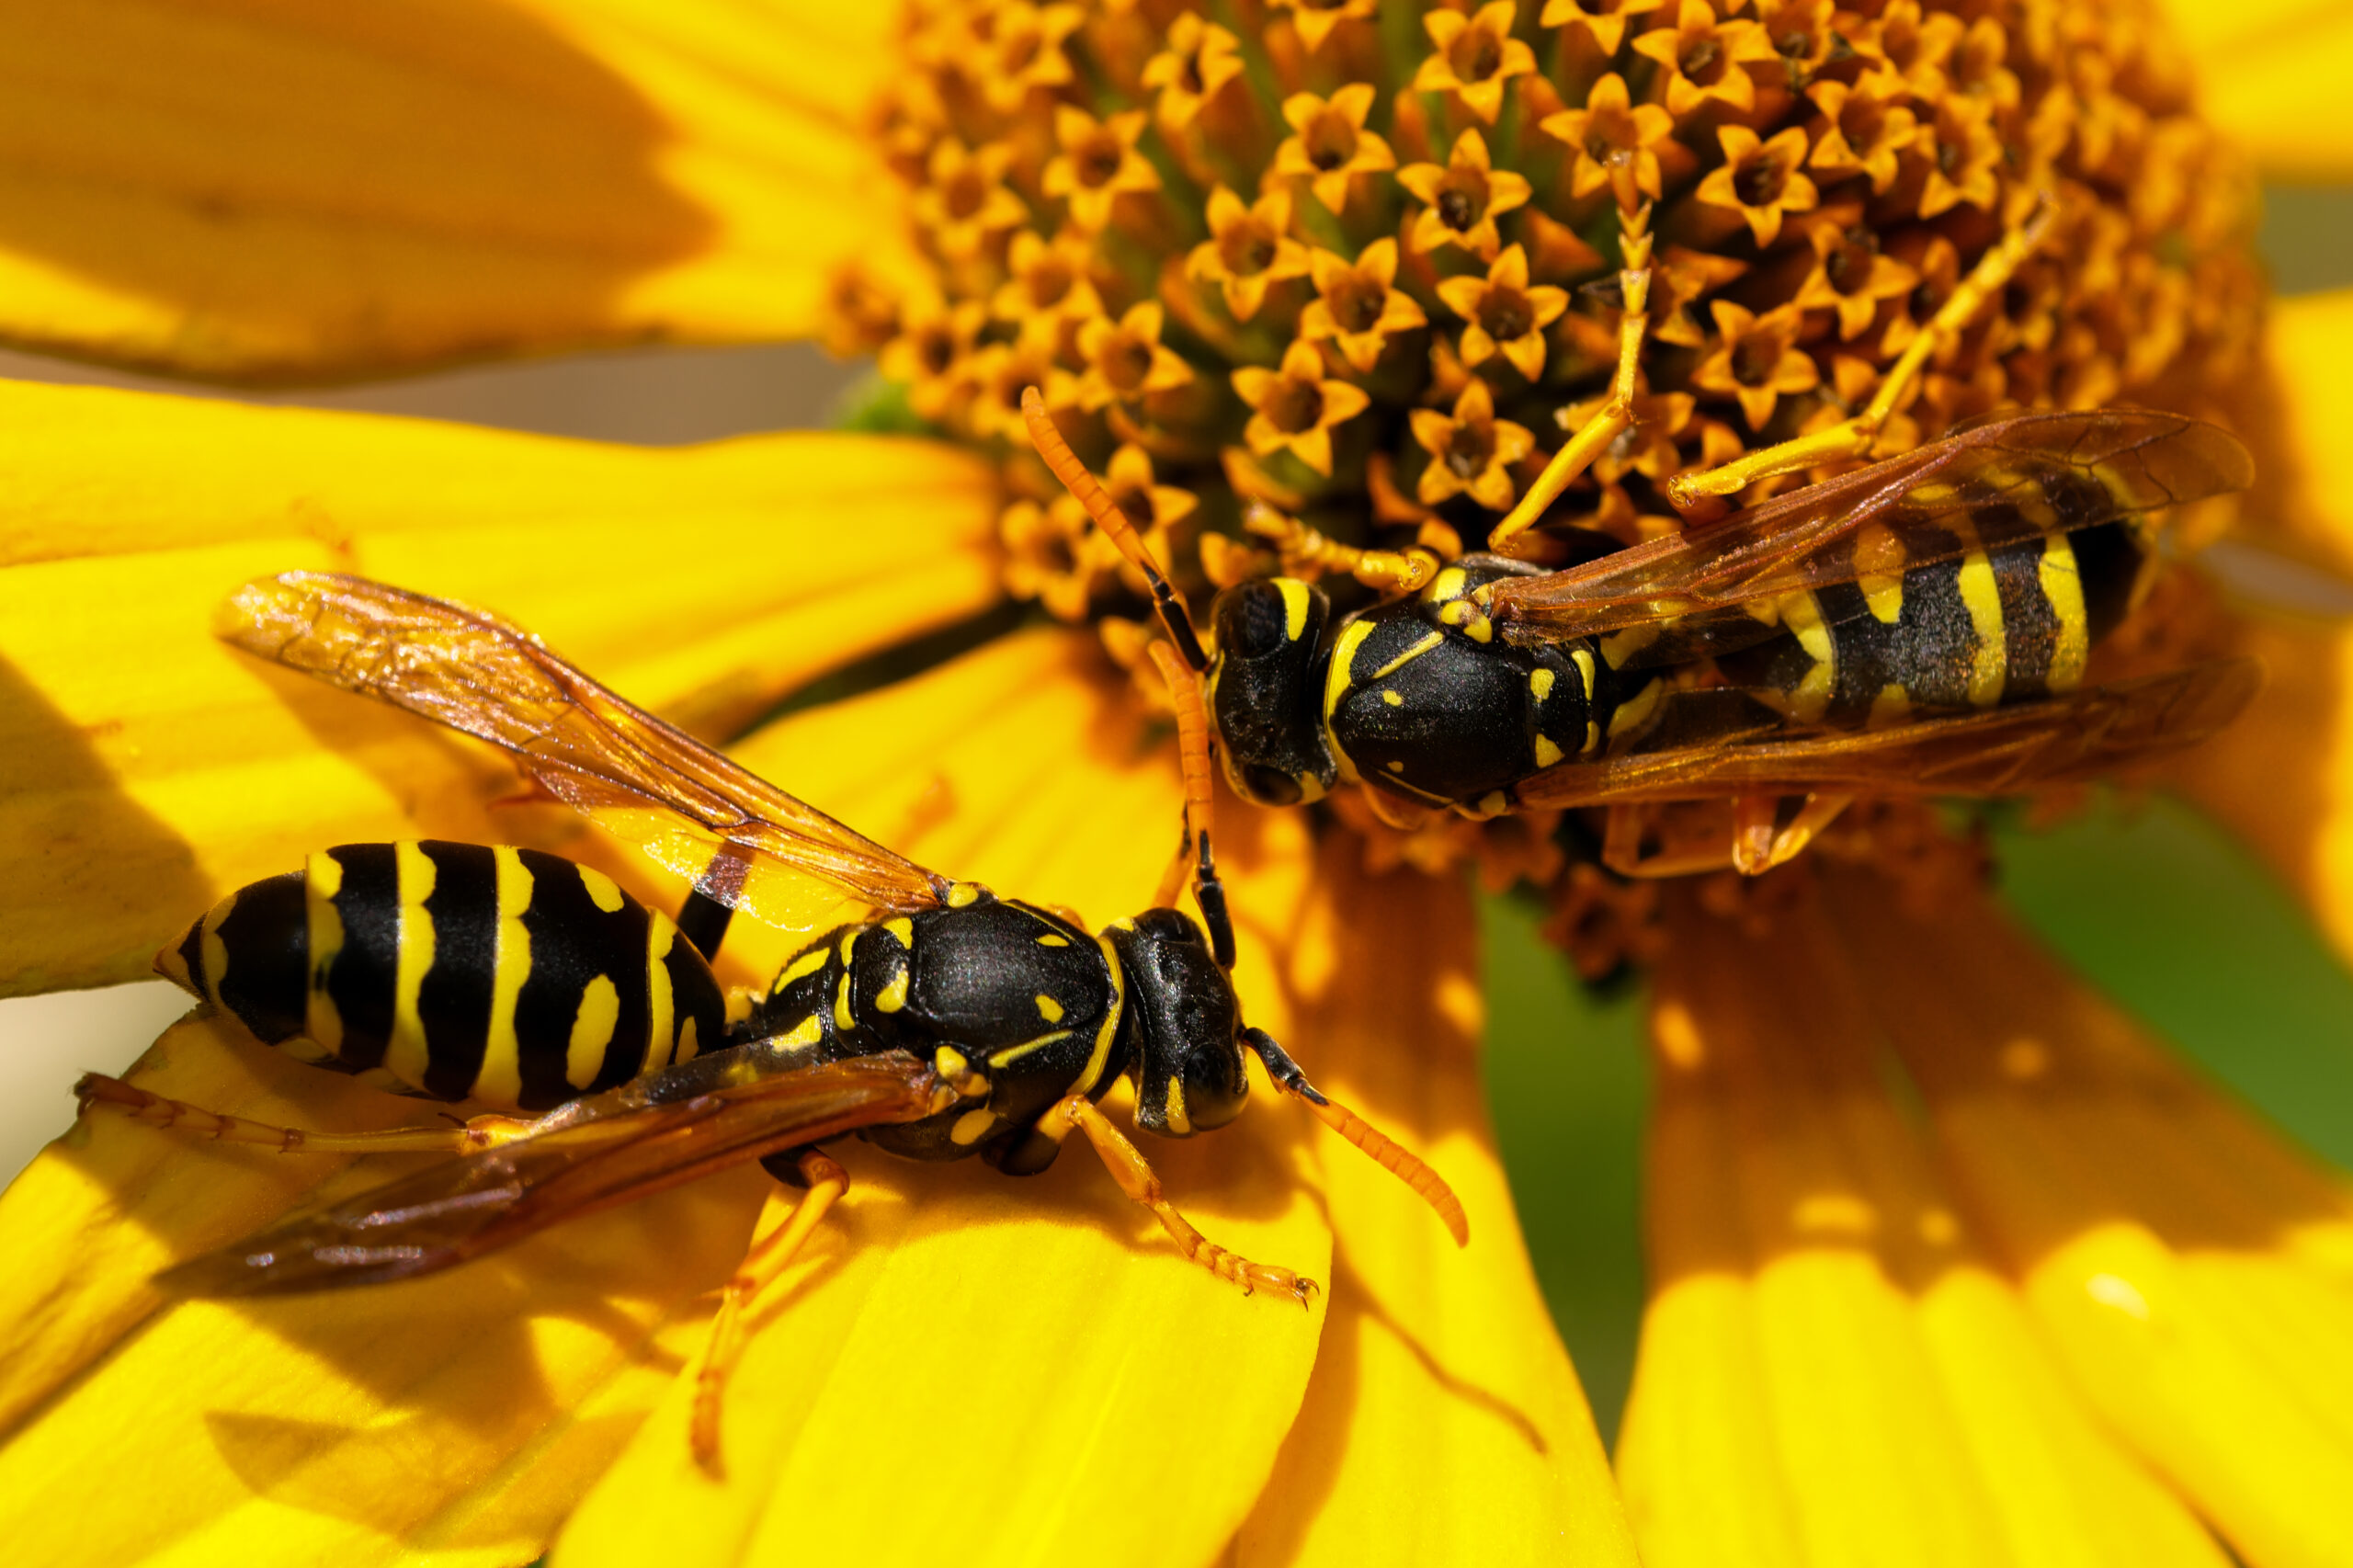 Two wasps on a yellow flower